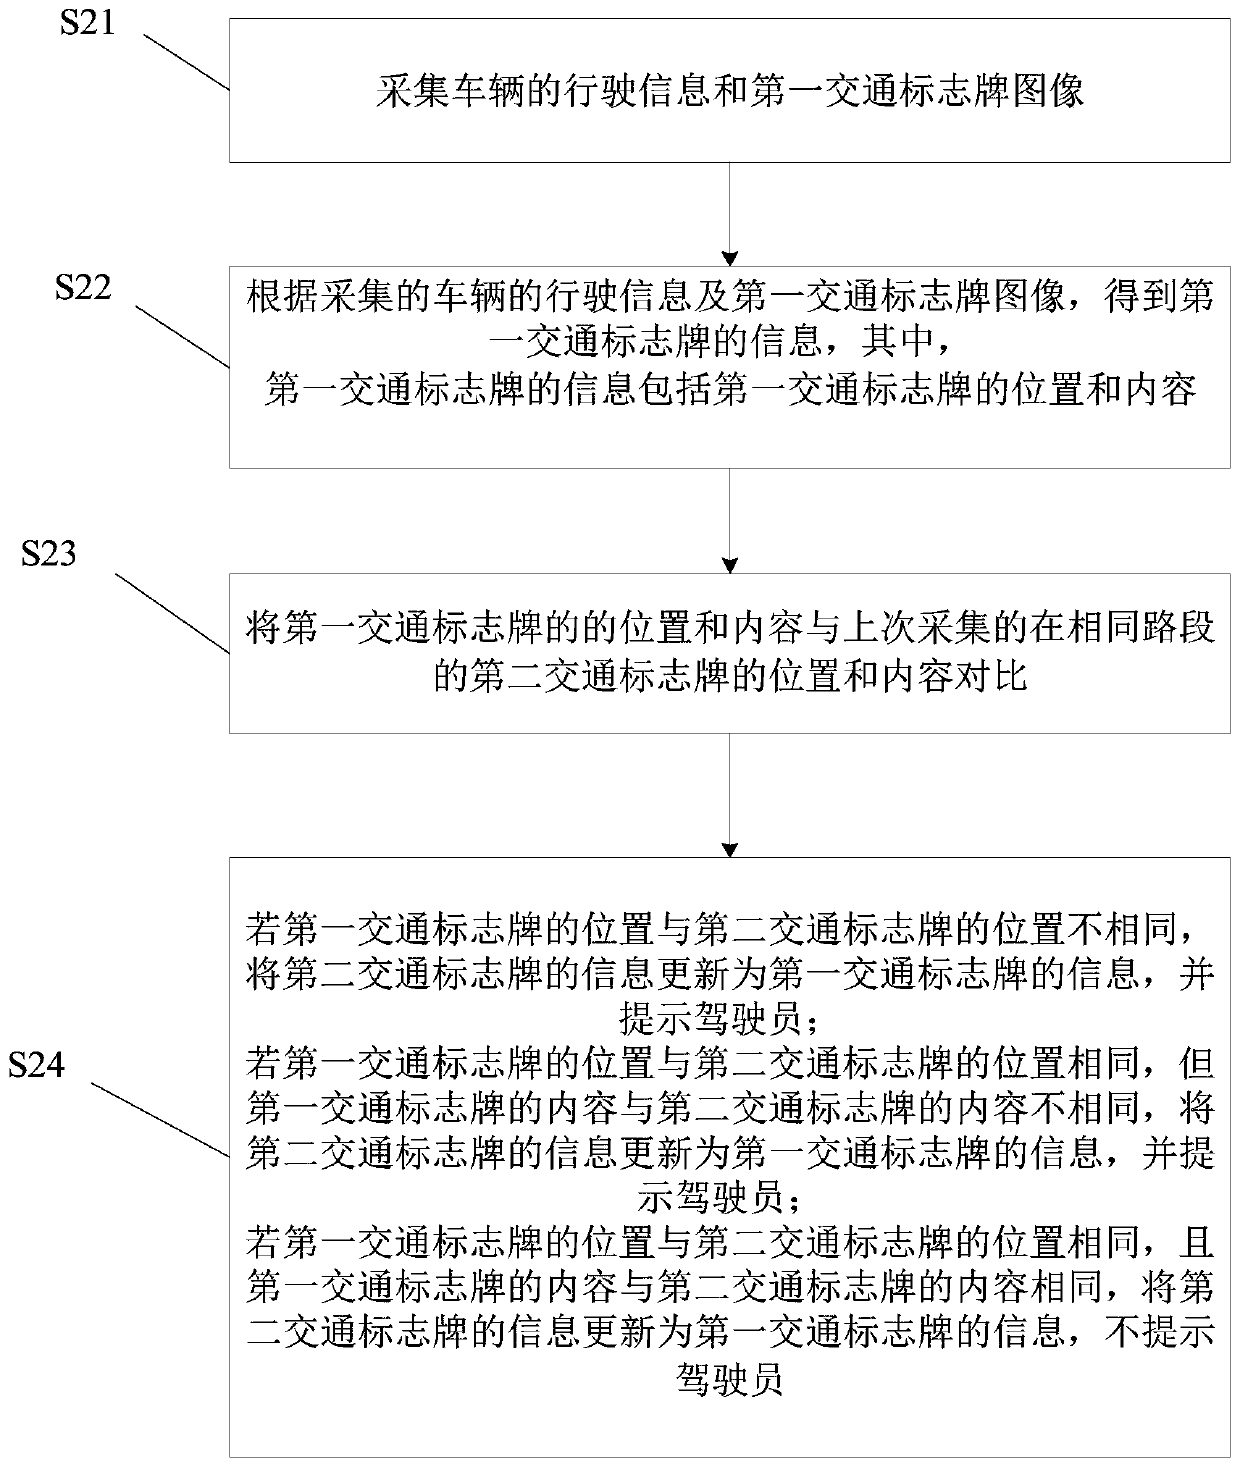 Driving recording method and system for identifying change of traffic sign board